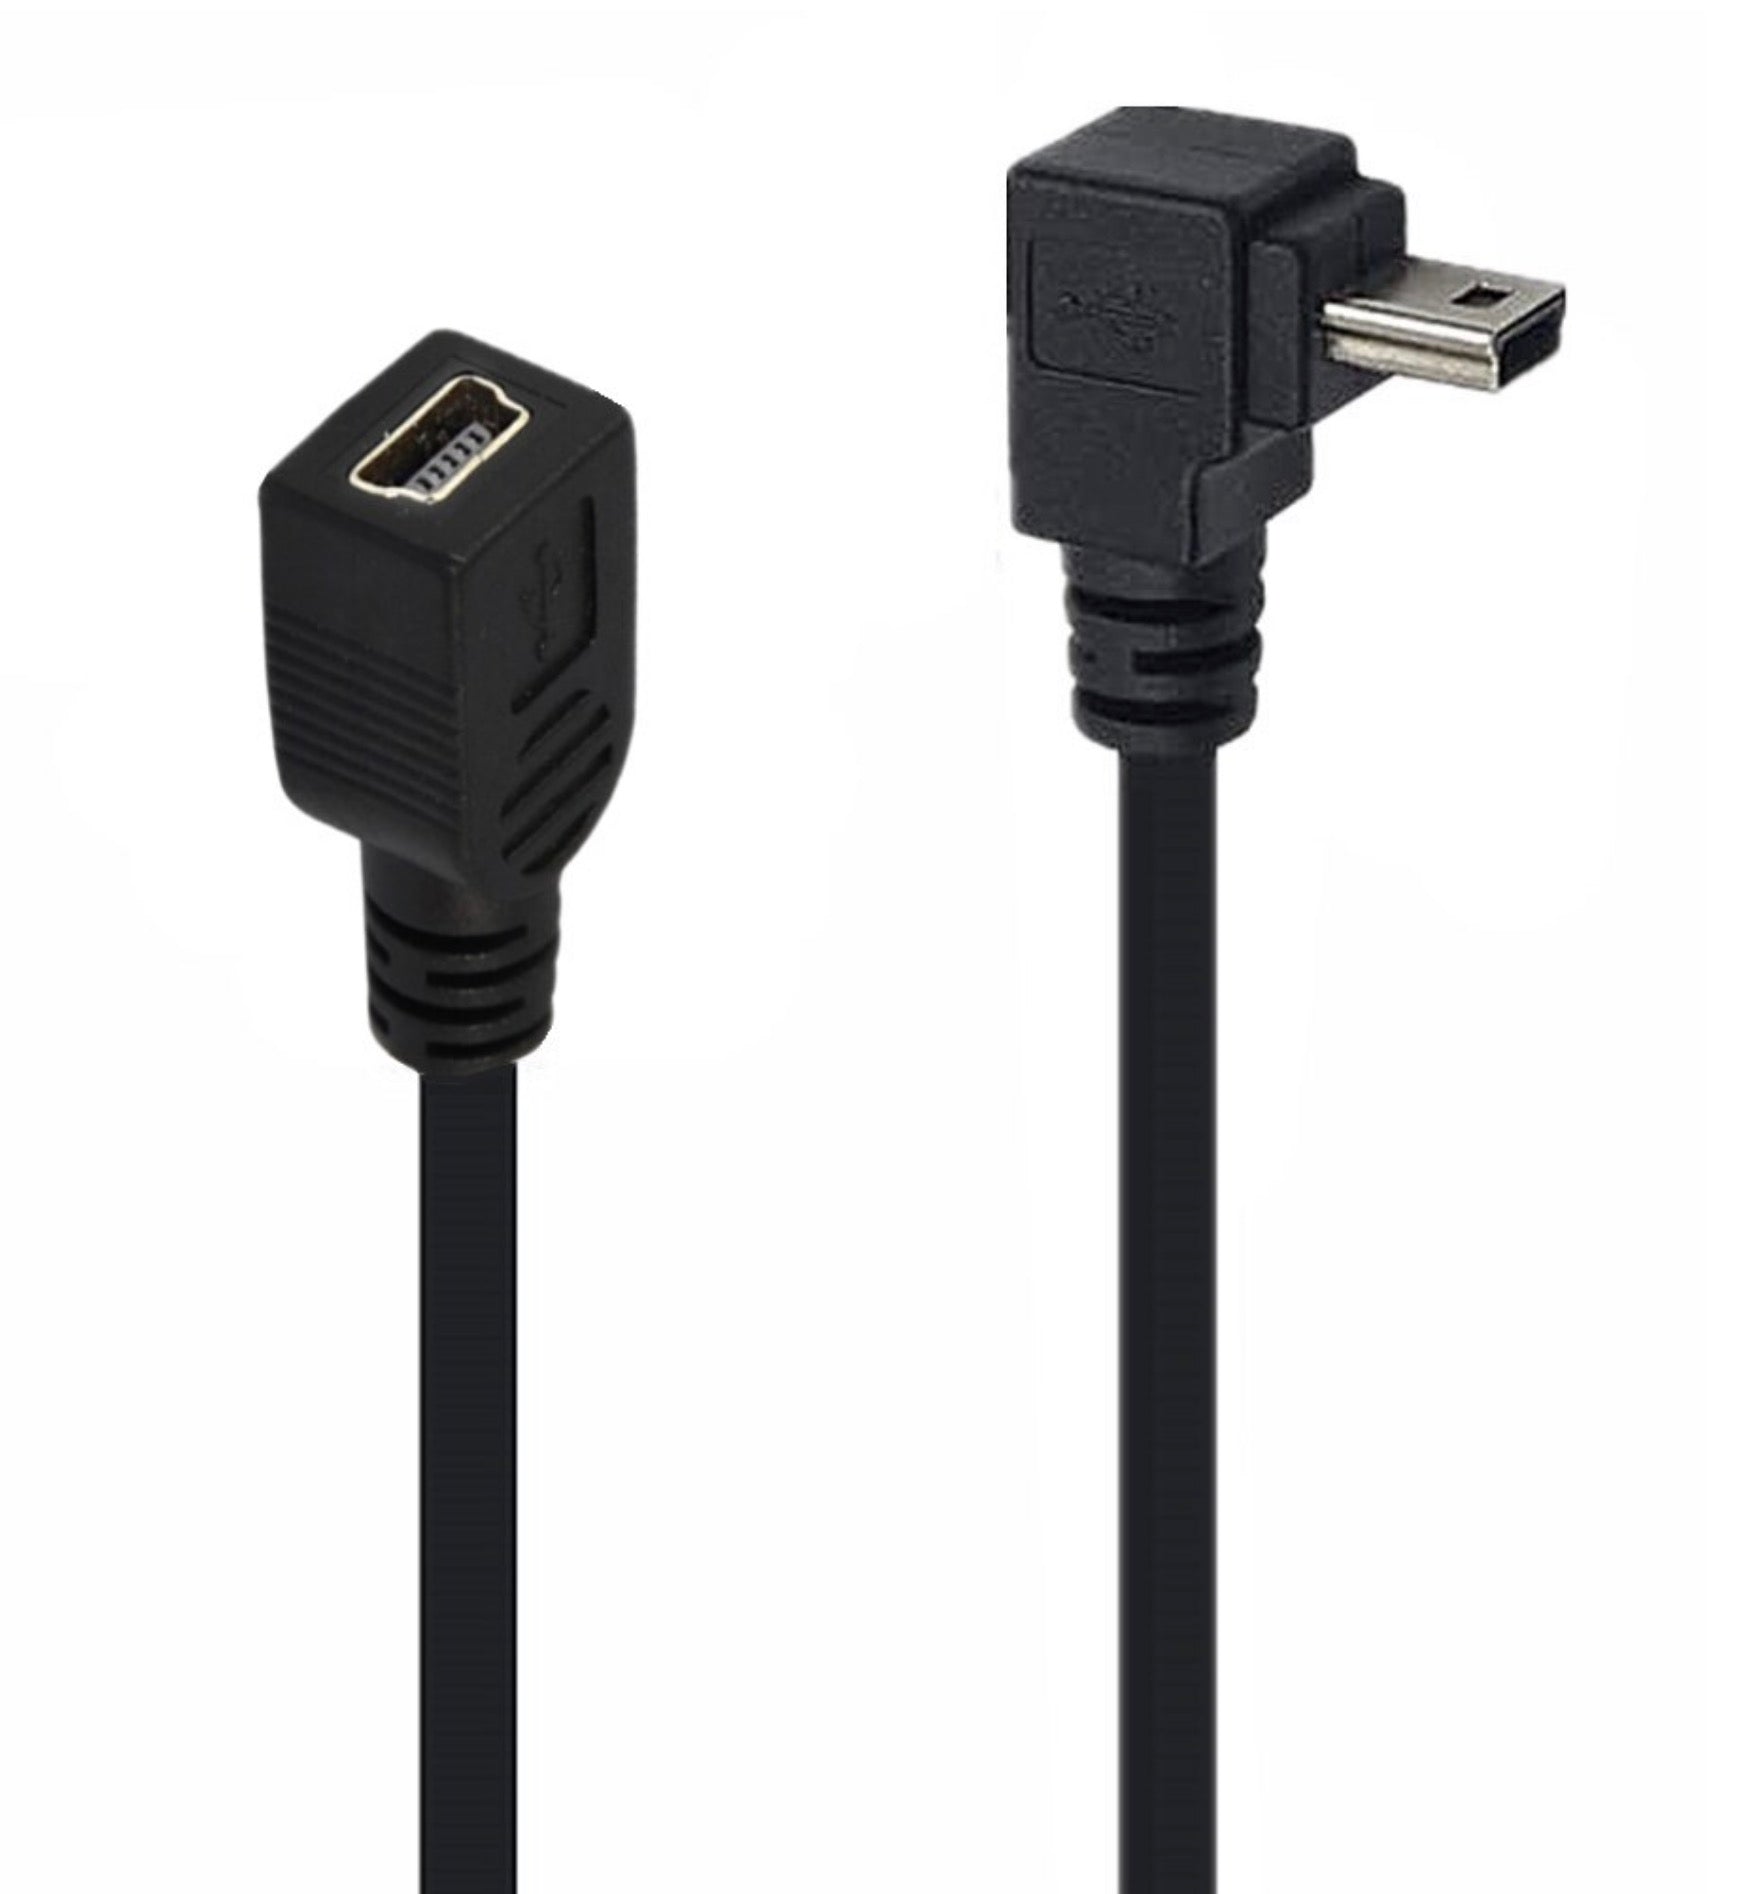 Mini USB 2.0 Type-B Male to Female Extension Cable 0.25m